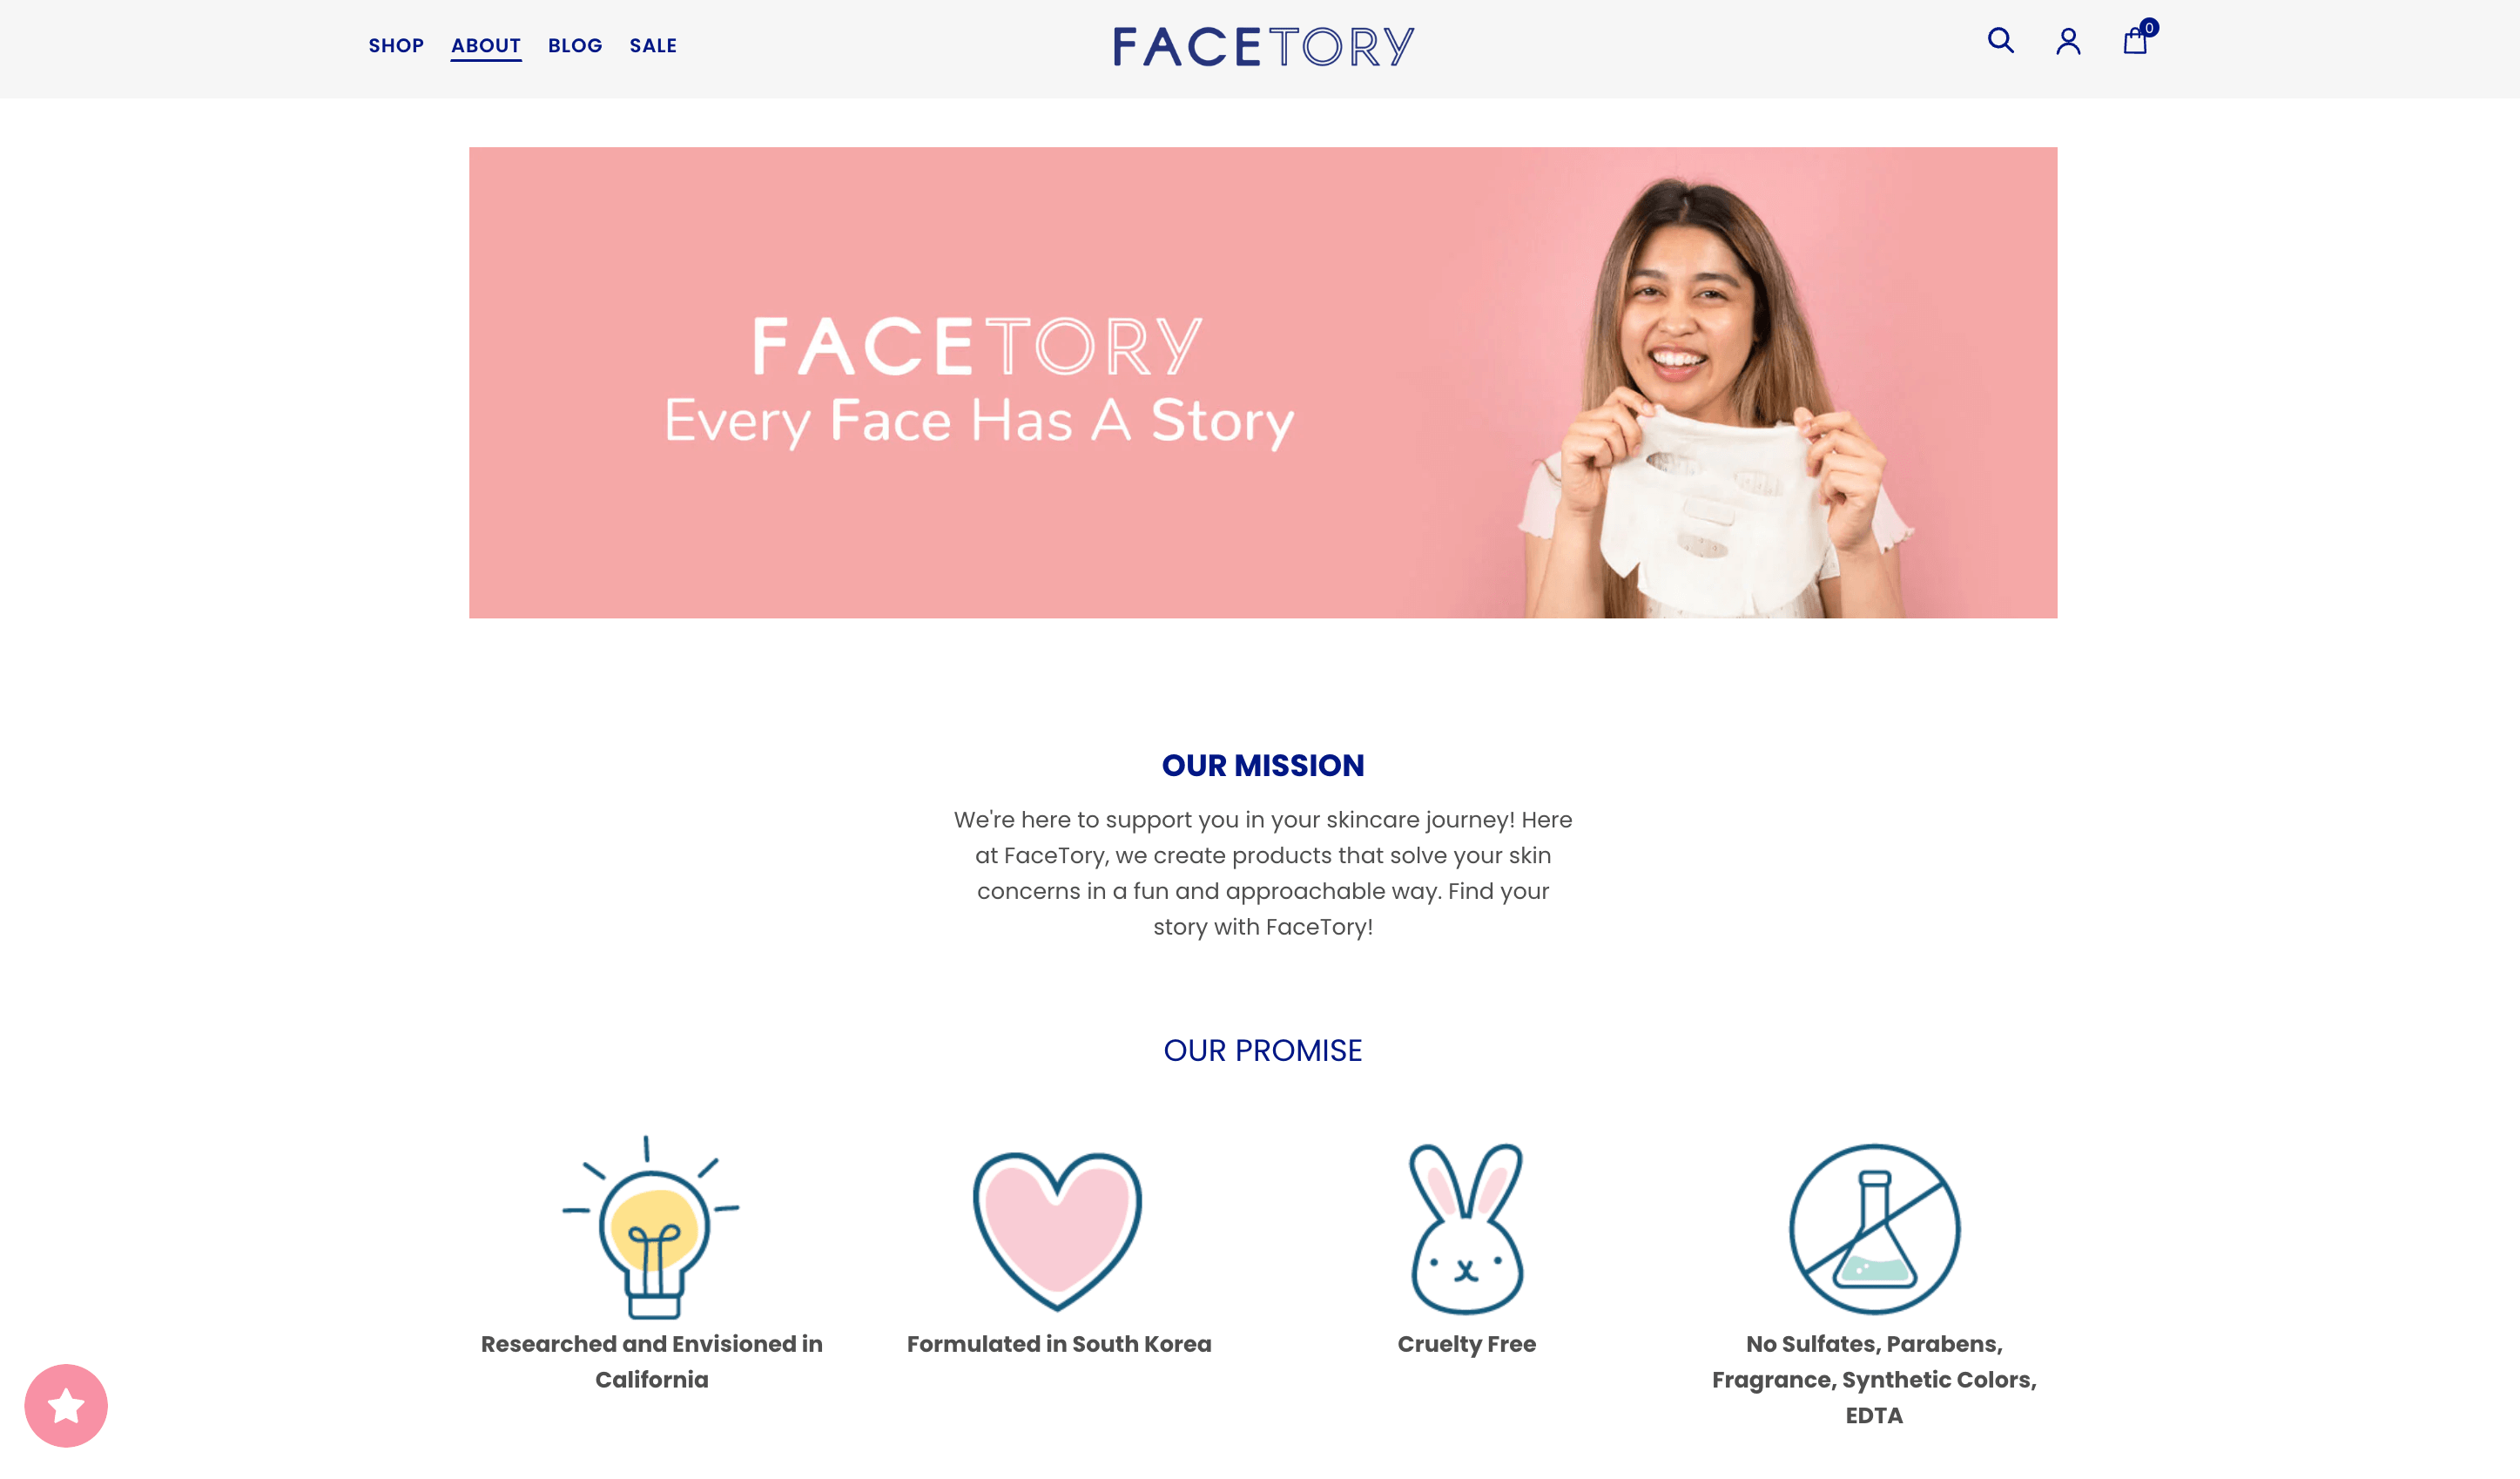 A screenshot from FaceTory’s About page, showing its tagline, “Every Face Has A Story”. 